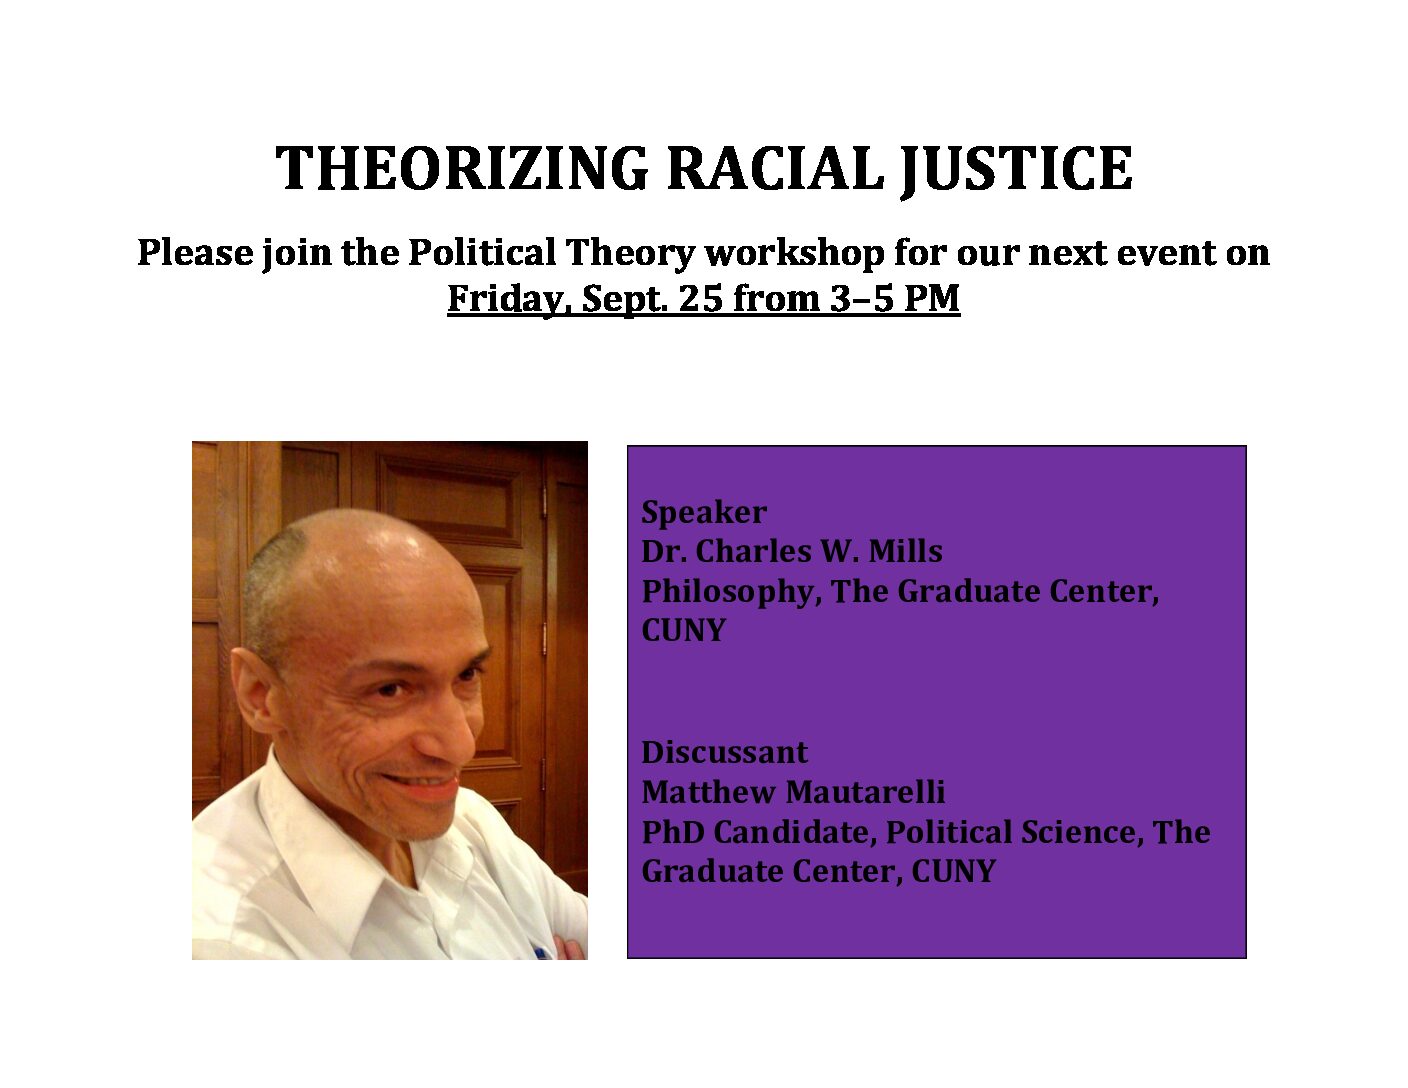 Political Theory Workshop: Charles Mills, "Theorizing Racial Justice"